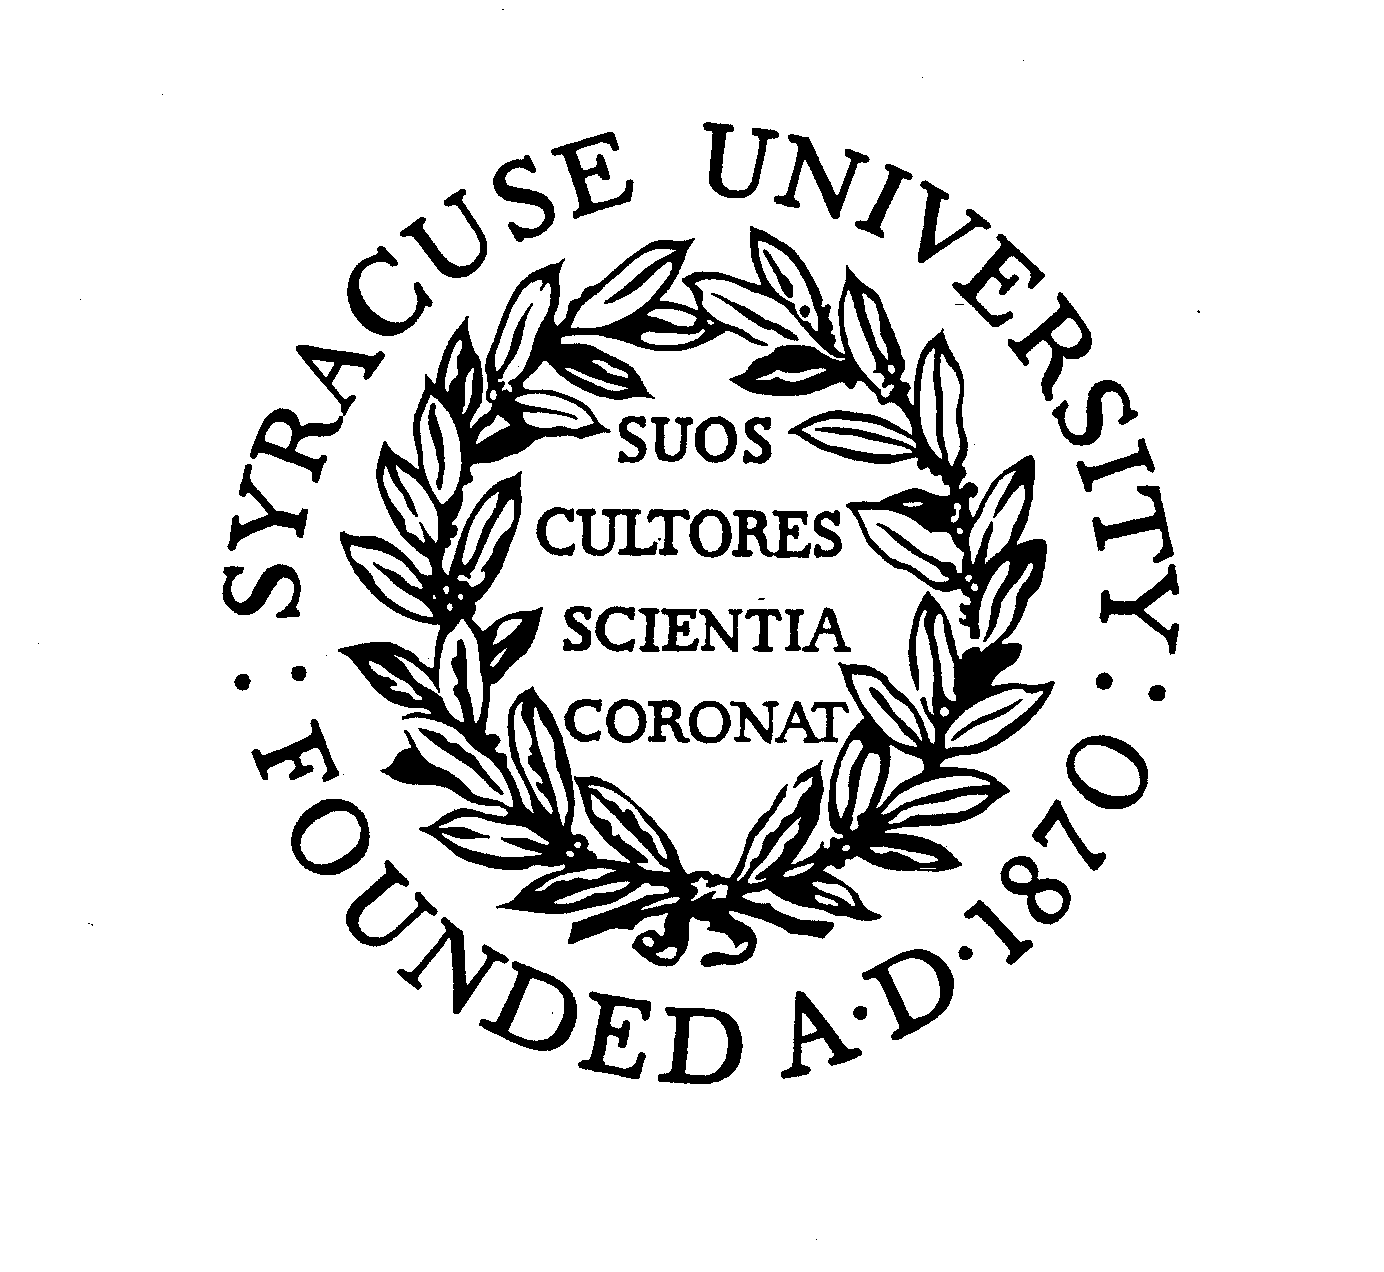  SYRACUSE UNIVERSITY FOUNDED A.D. 1870 SUOS COLTORES SCIENTIA CORONAT